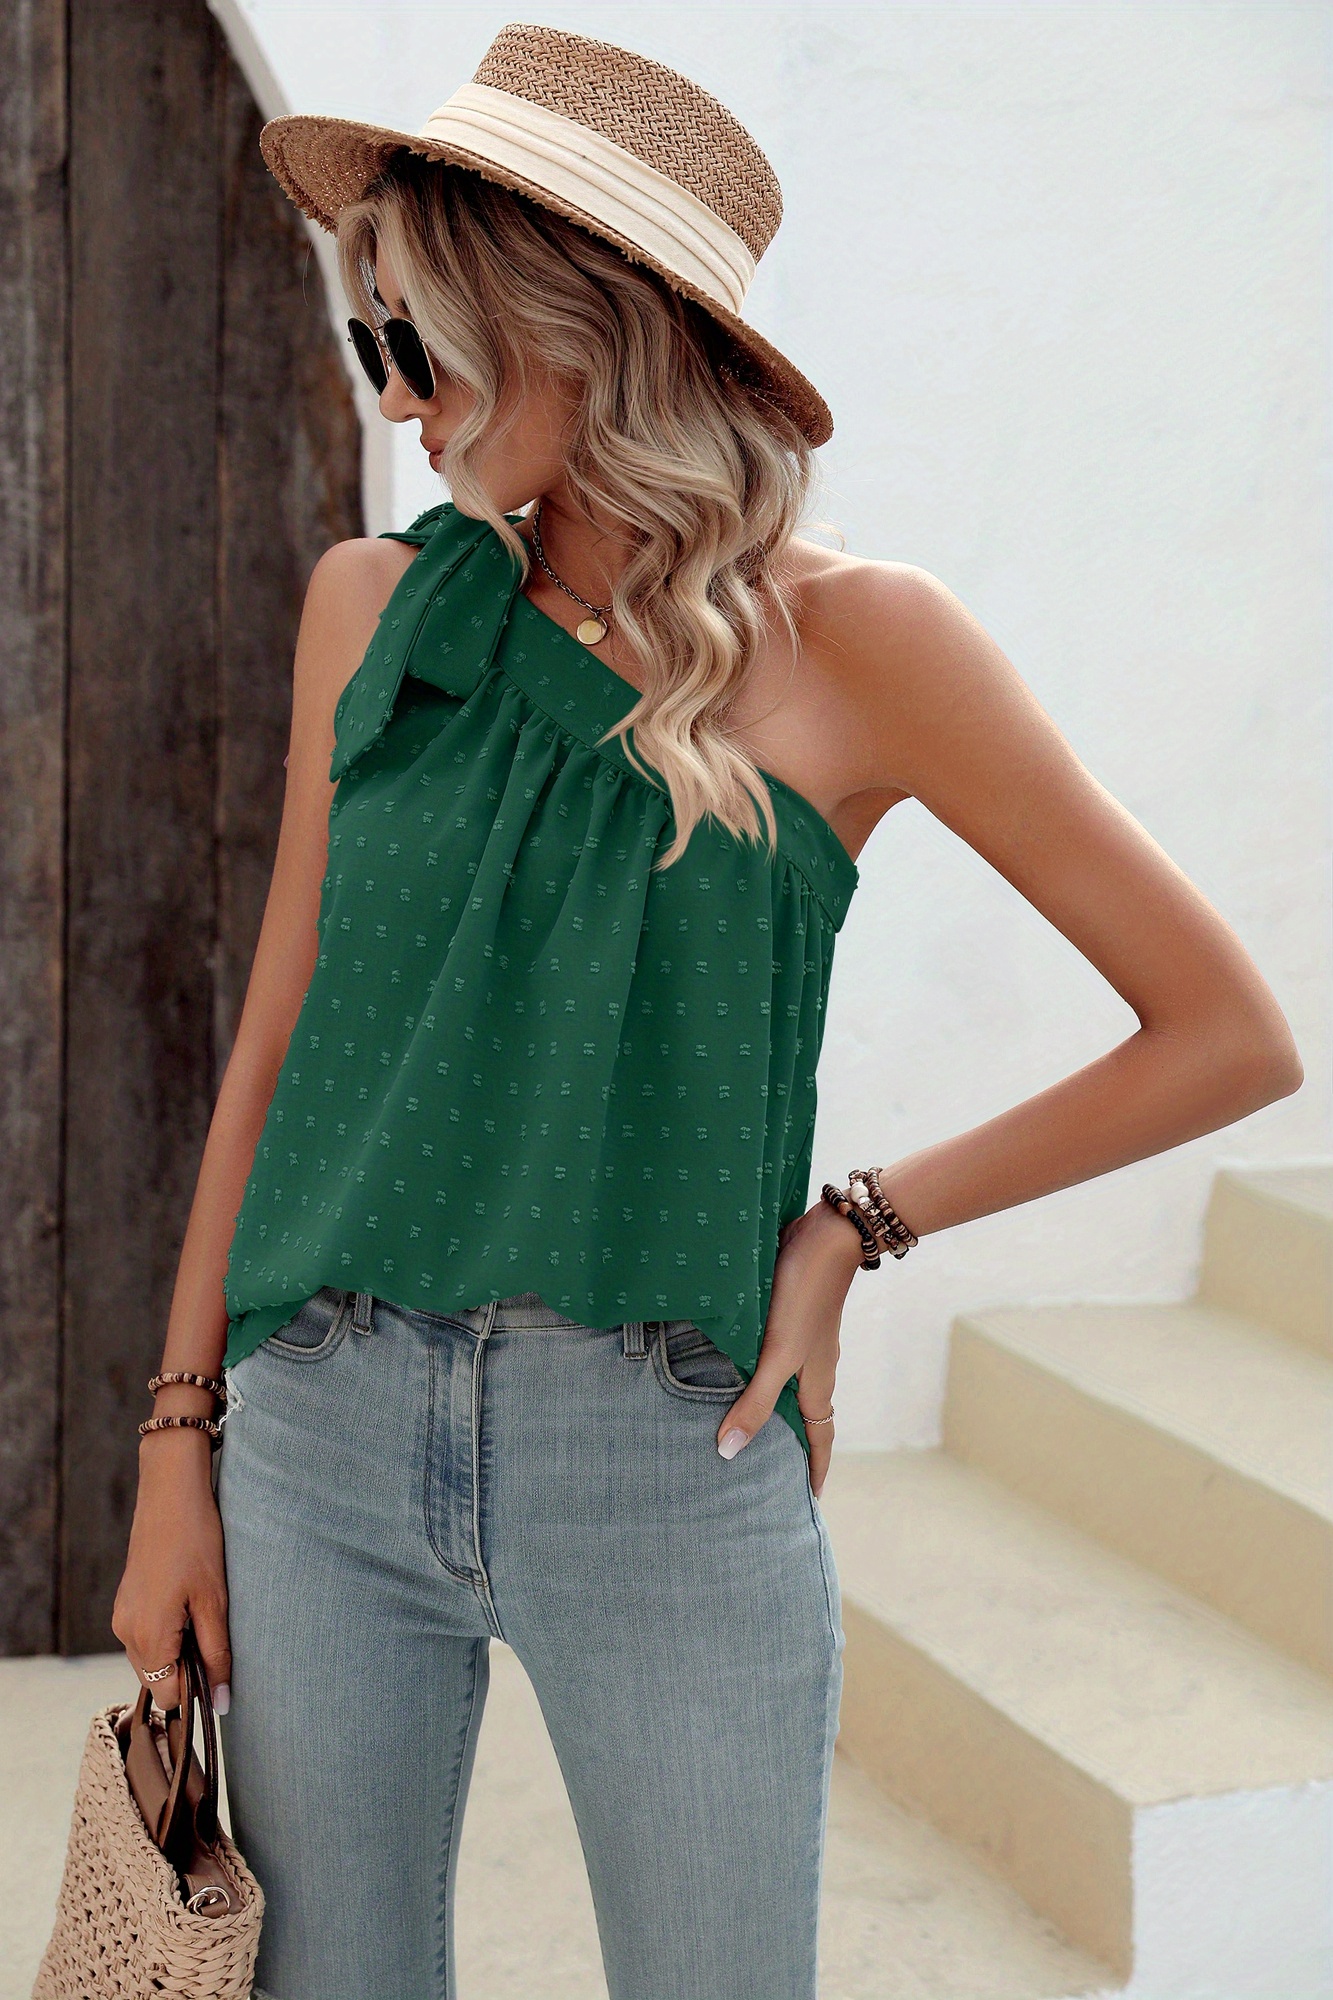 20 One Shoulder Tops to Wear This Summer